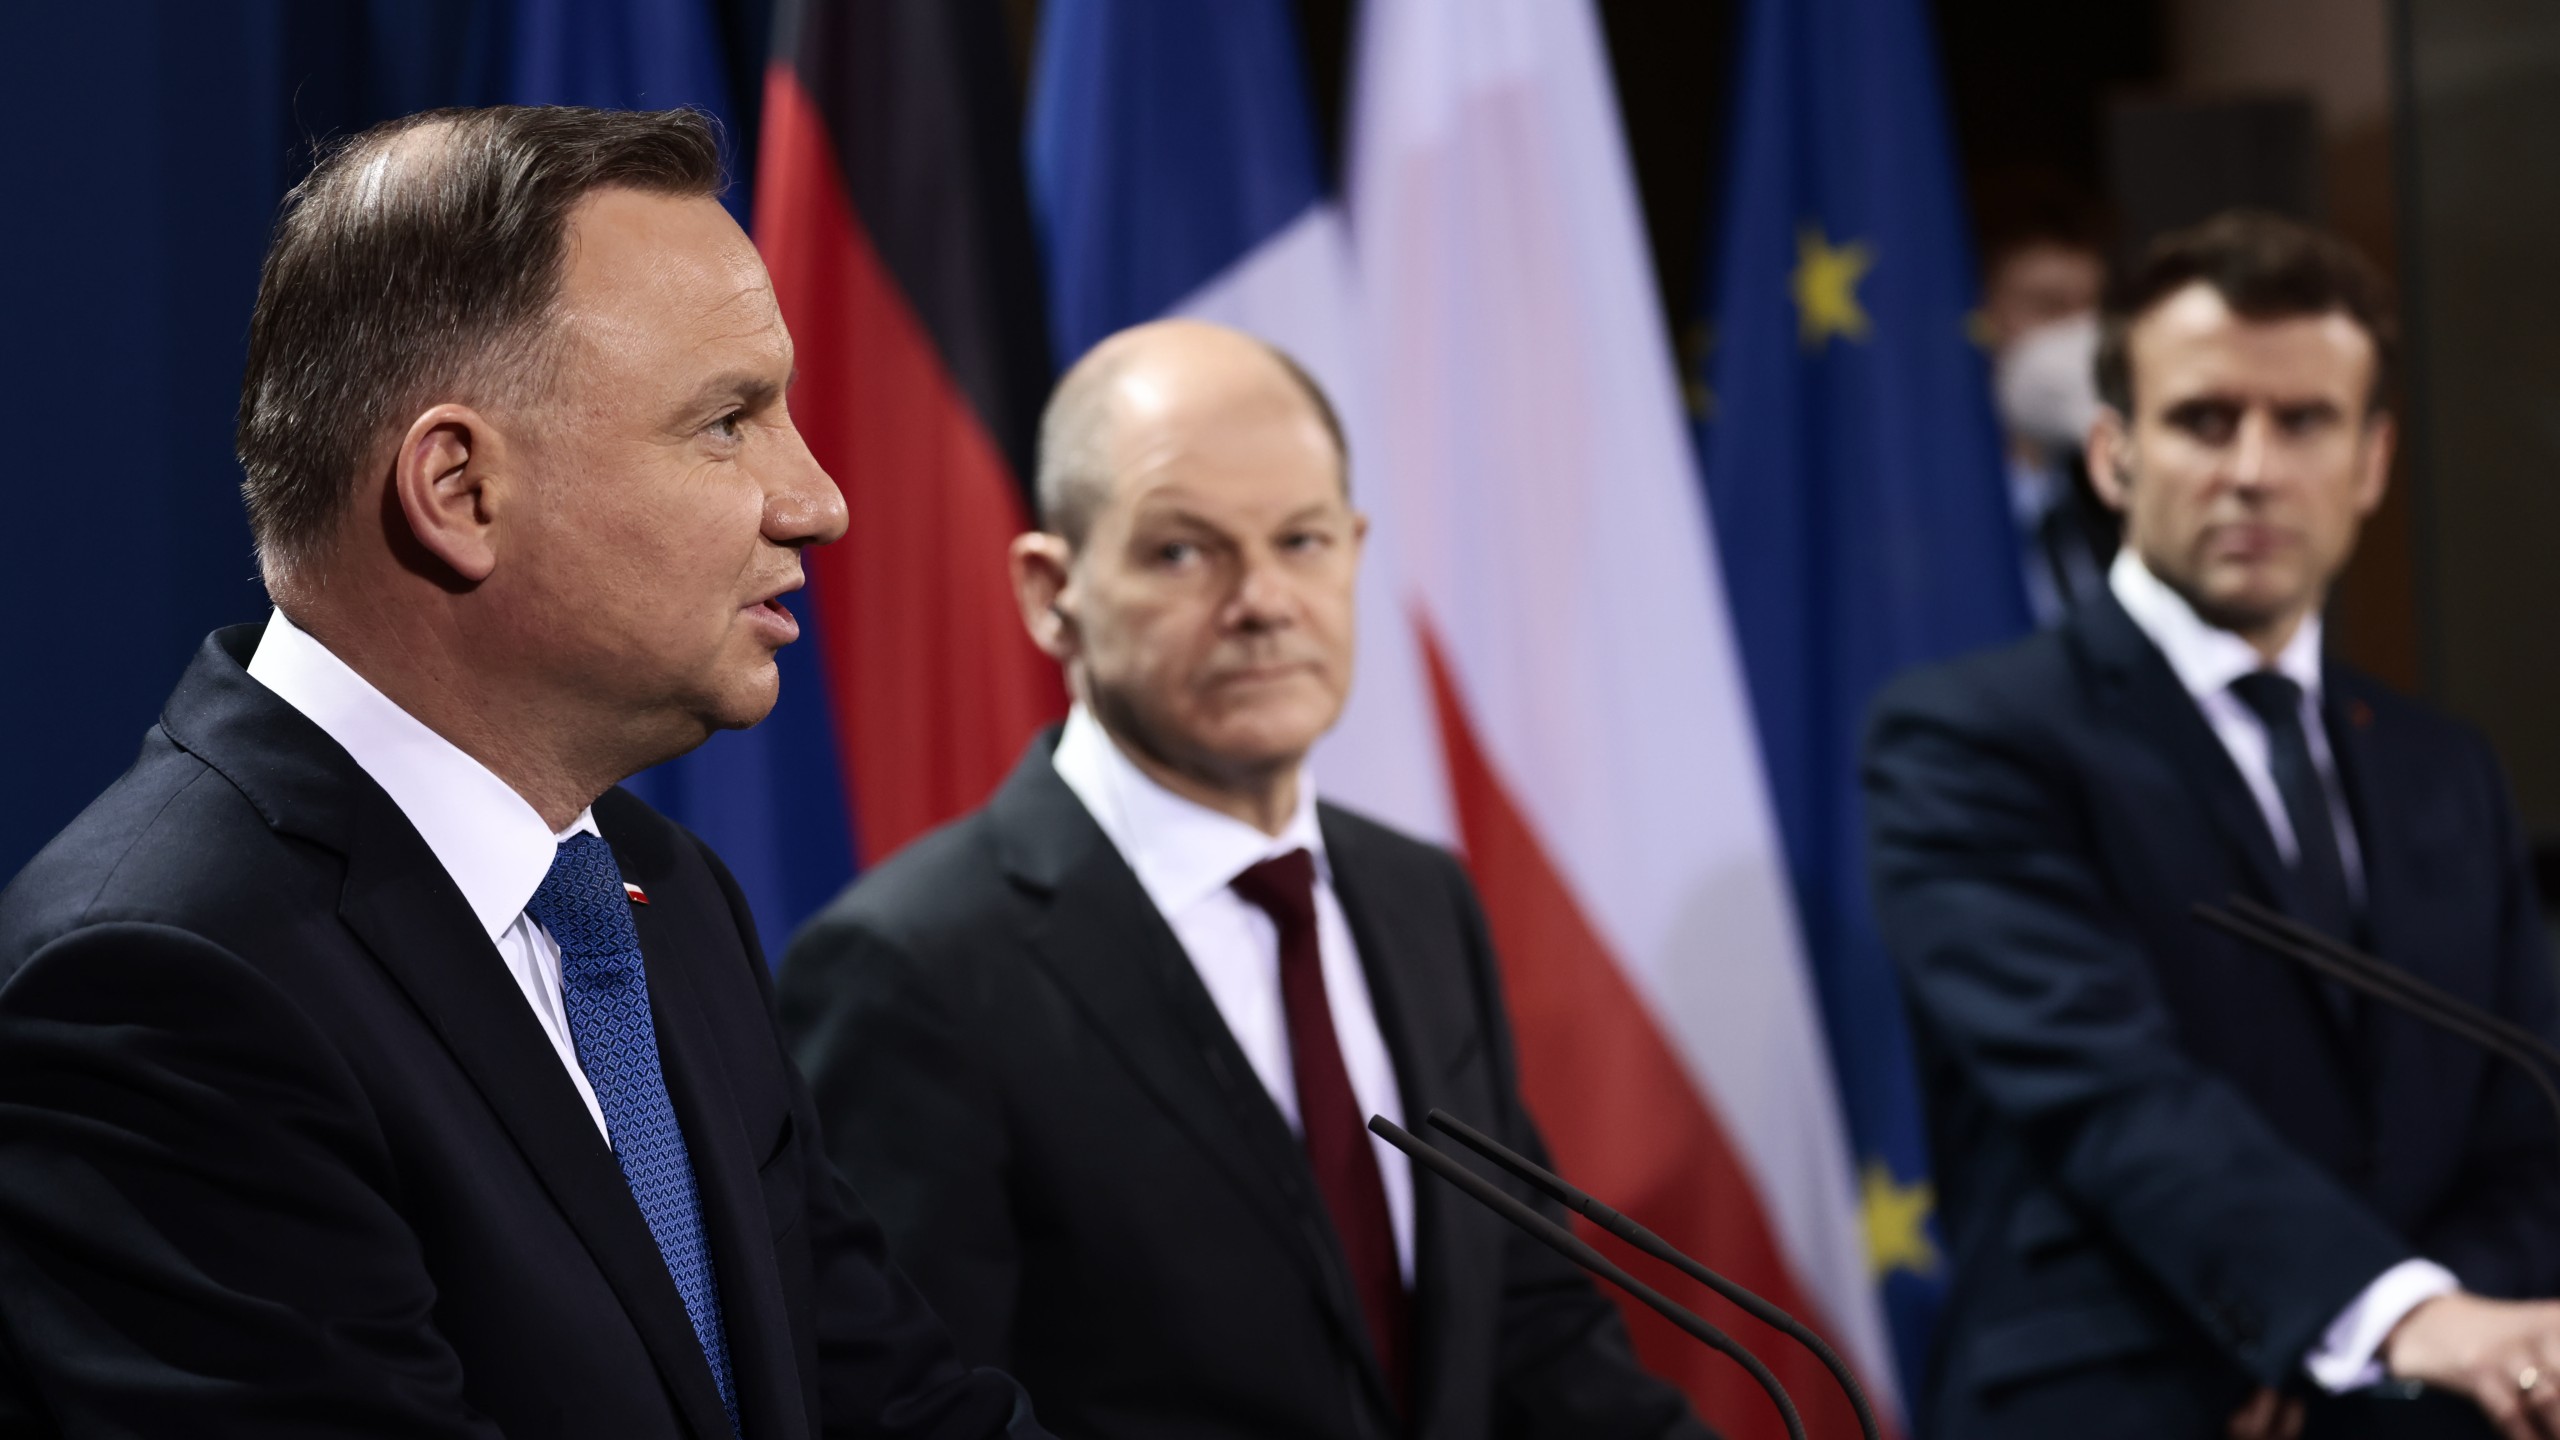 epa09739126 German Chancellor Olaf Scholz (C), French President Emmanuel Macron (R) and Polish President Andrzej Duda (L) speak to media ahead of a Weimar Triangle meeting to discuss the ongoing Ukraine crisis, in Berlin, Germany, 08 February 2022.  EPA/HANNIBAL HANSCHKE